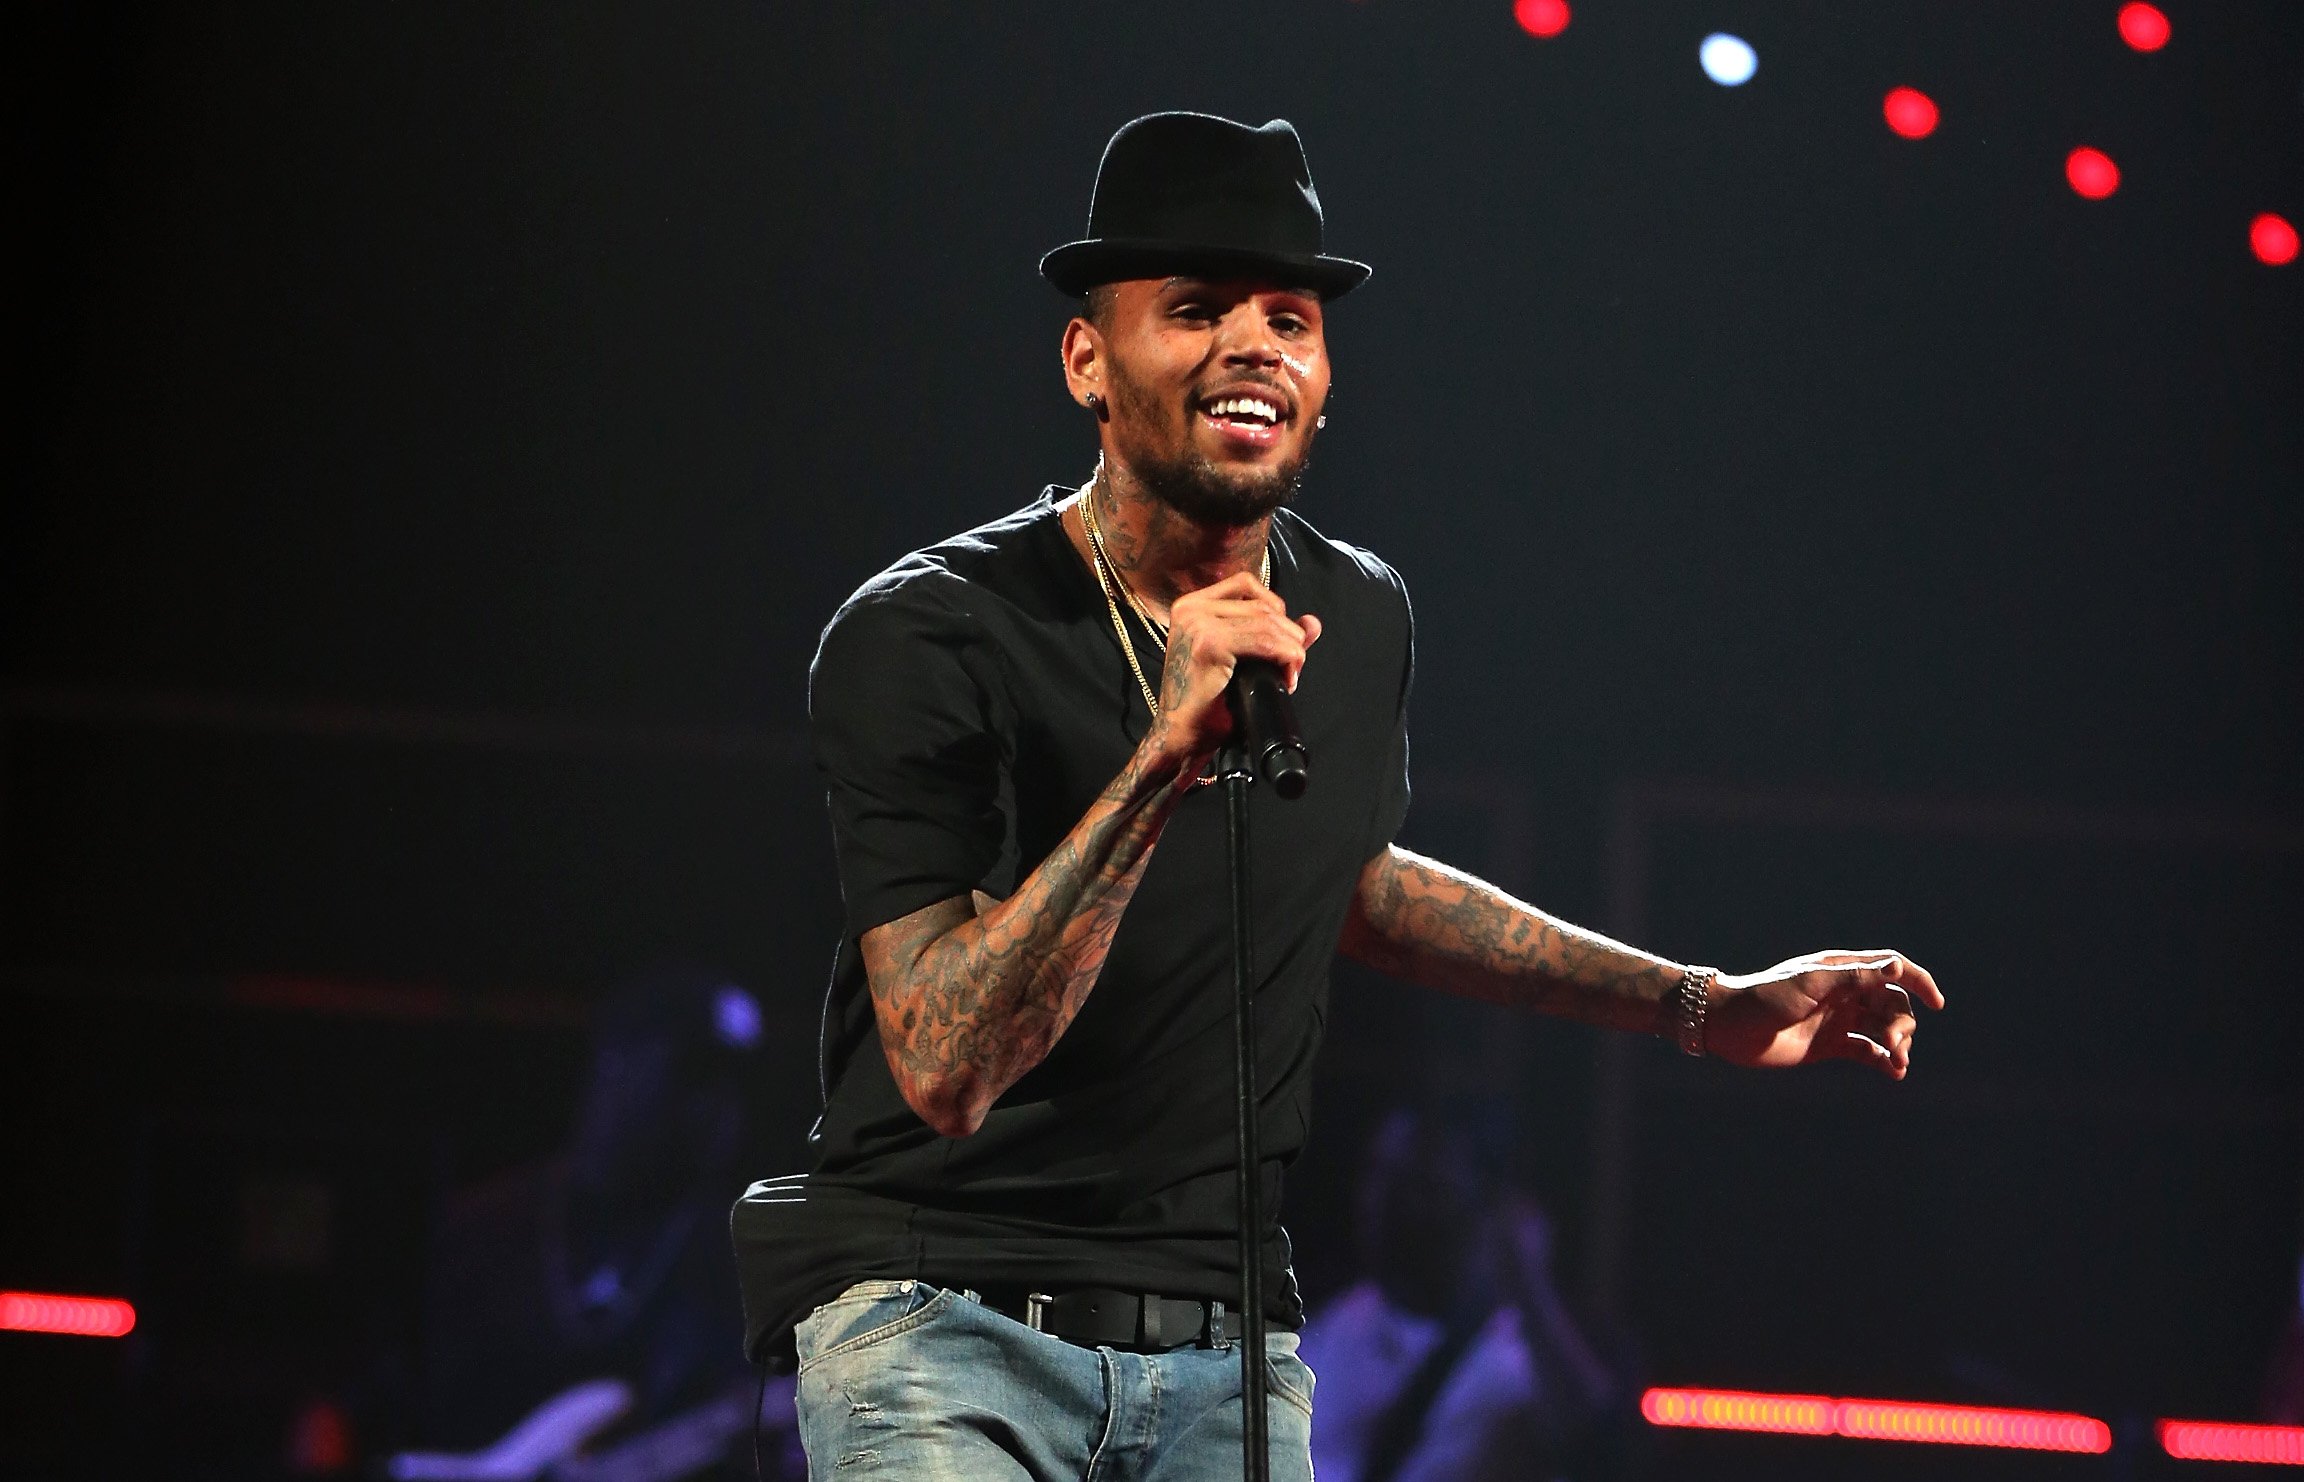 Singer Chris Brown performs onstage during the iHeartRadio Music Festival